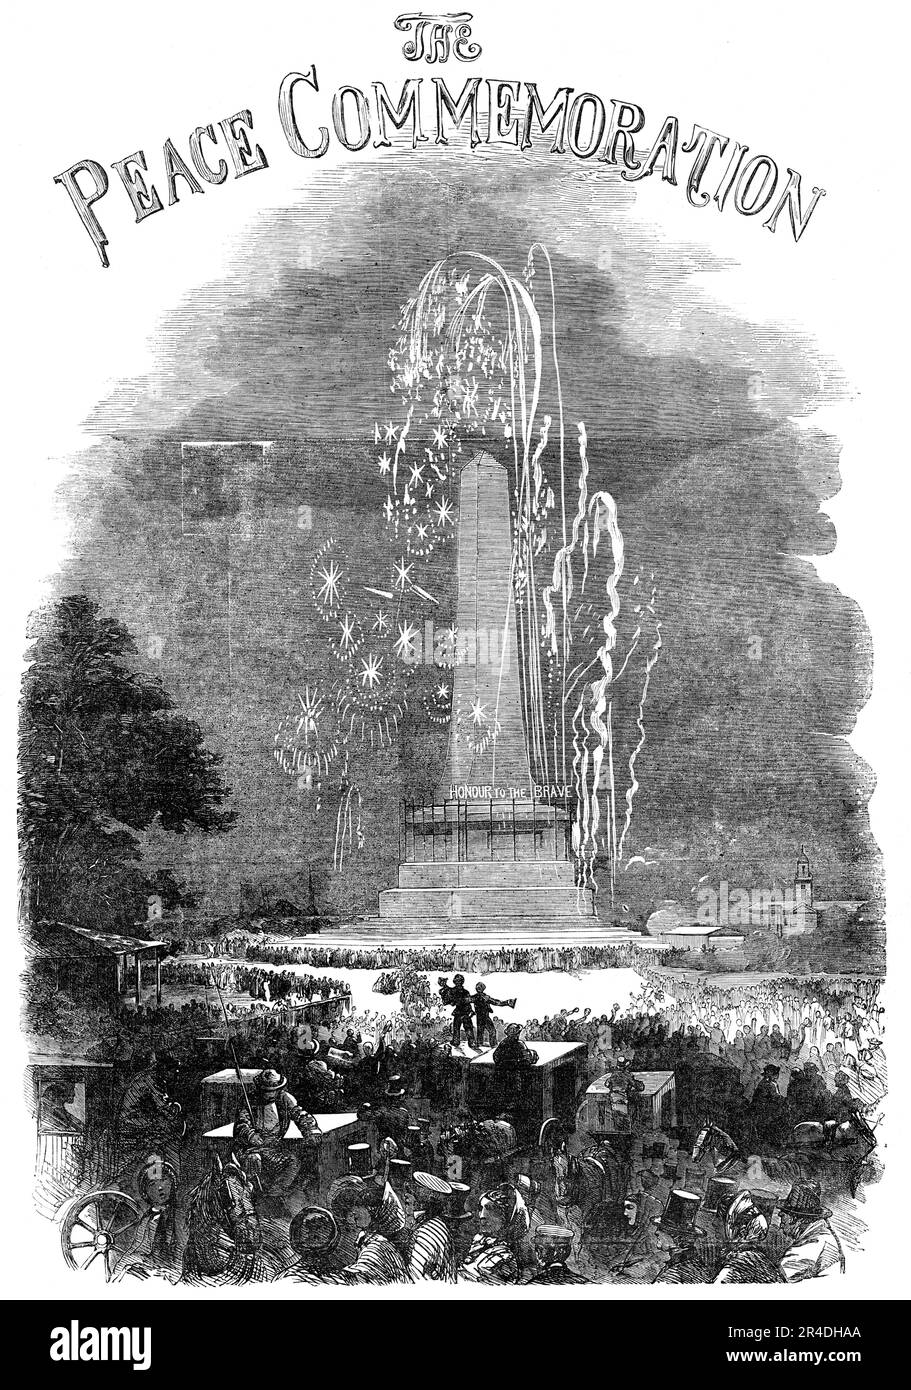 The Peace Commemoration: at Dublin - Fireworks in Phoenix Park, 1856. Celebrating the end of the Crimean War in Ireland: 'brilliant scene around the Wellington Obelisk...[the programme promised:] &quot;Grand pyrotechnic spectacle representing the last great attack on Sebastopol, with the blowing up of the magazines and works, &amp;c, general conflagration, finishing with fountains of crystal fires and Roman candles, casting their dazzling balls in every direction, and a grand bombardment of aerial projectiles and fiery missiles, hand-grenades, pots de saucissons, and concluding with a magnific Stock Photo